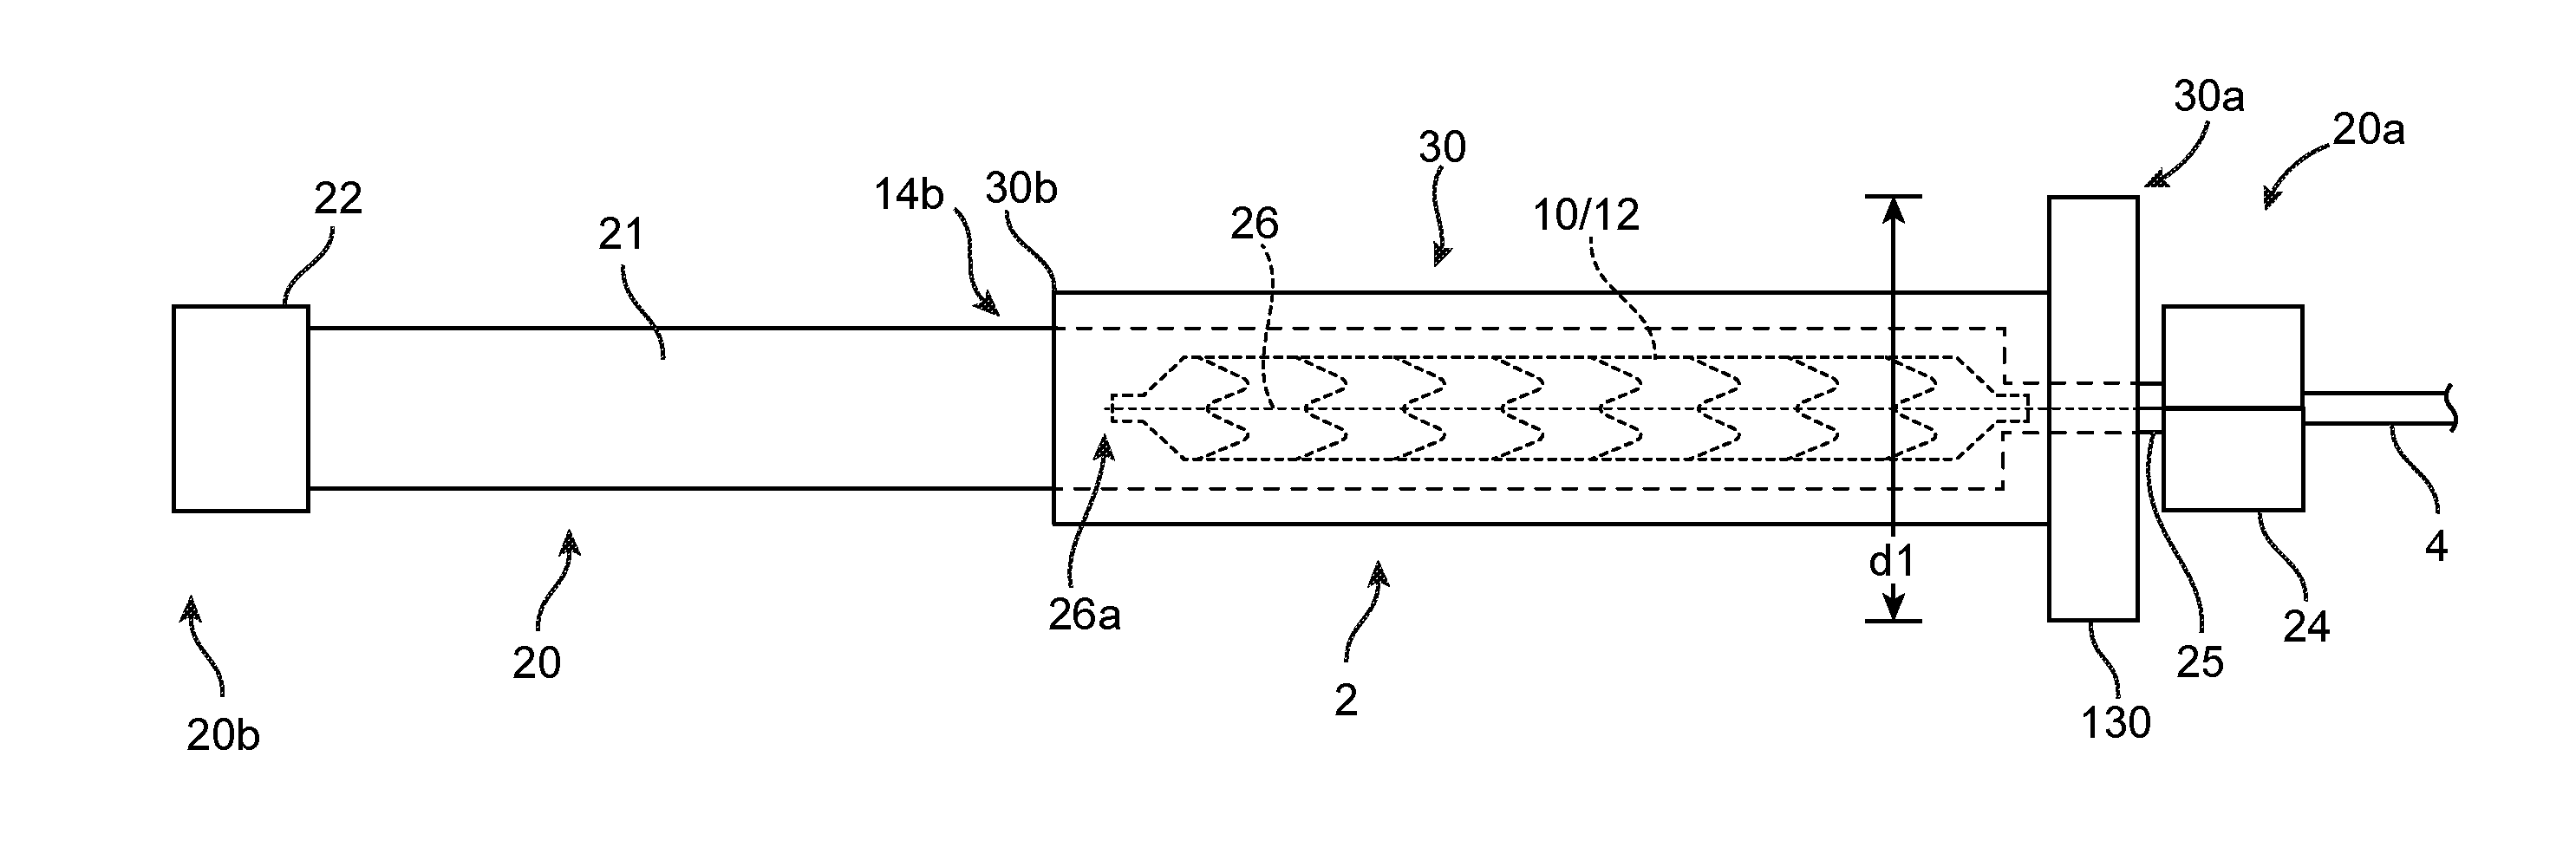 Protective sheath assembly for a polymer scaffold